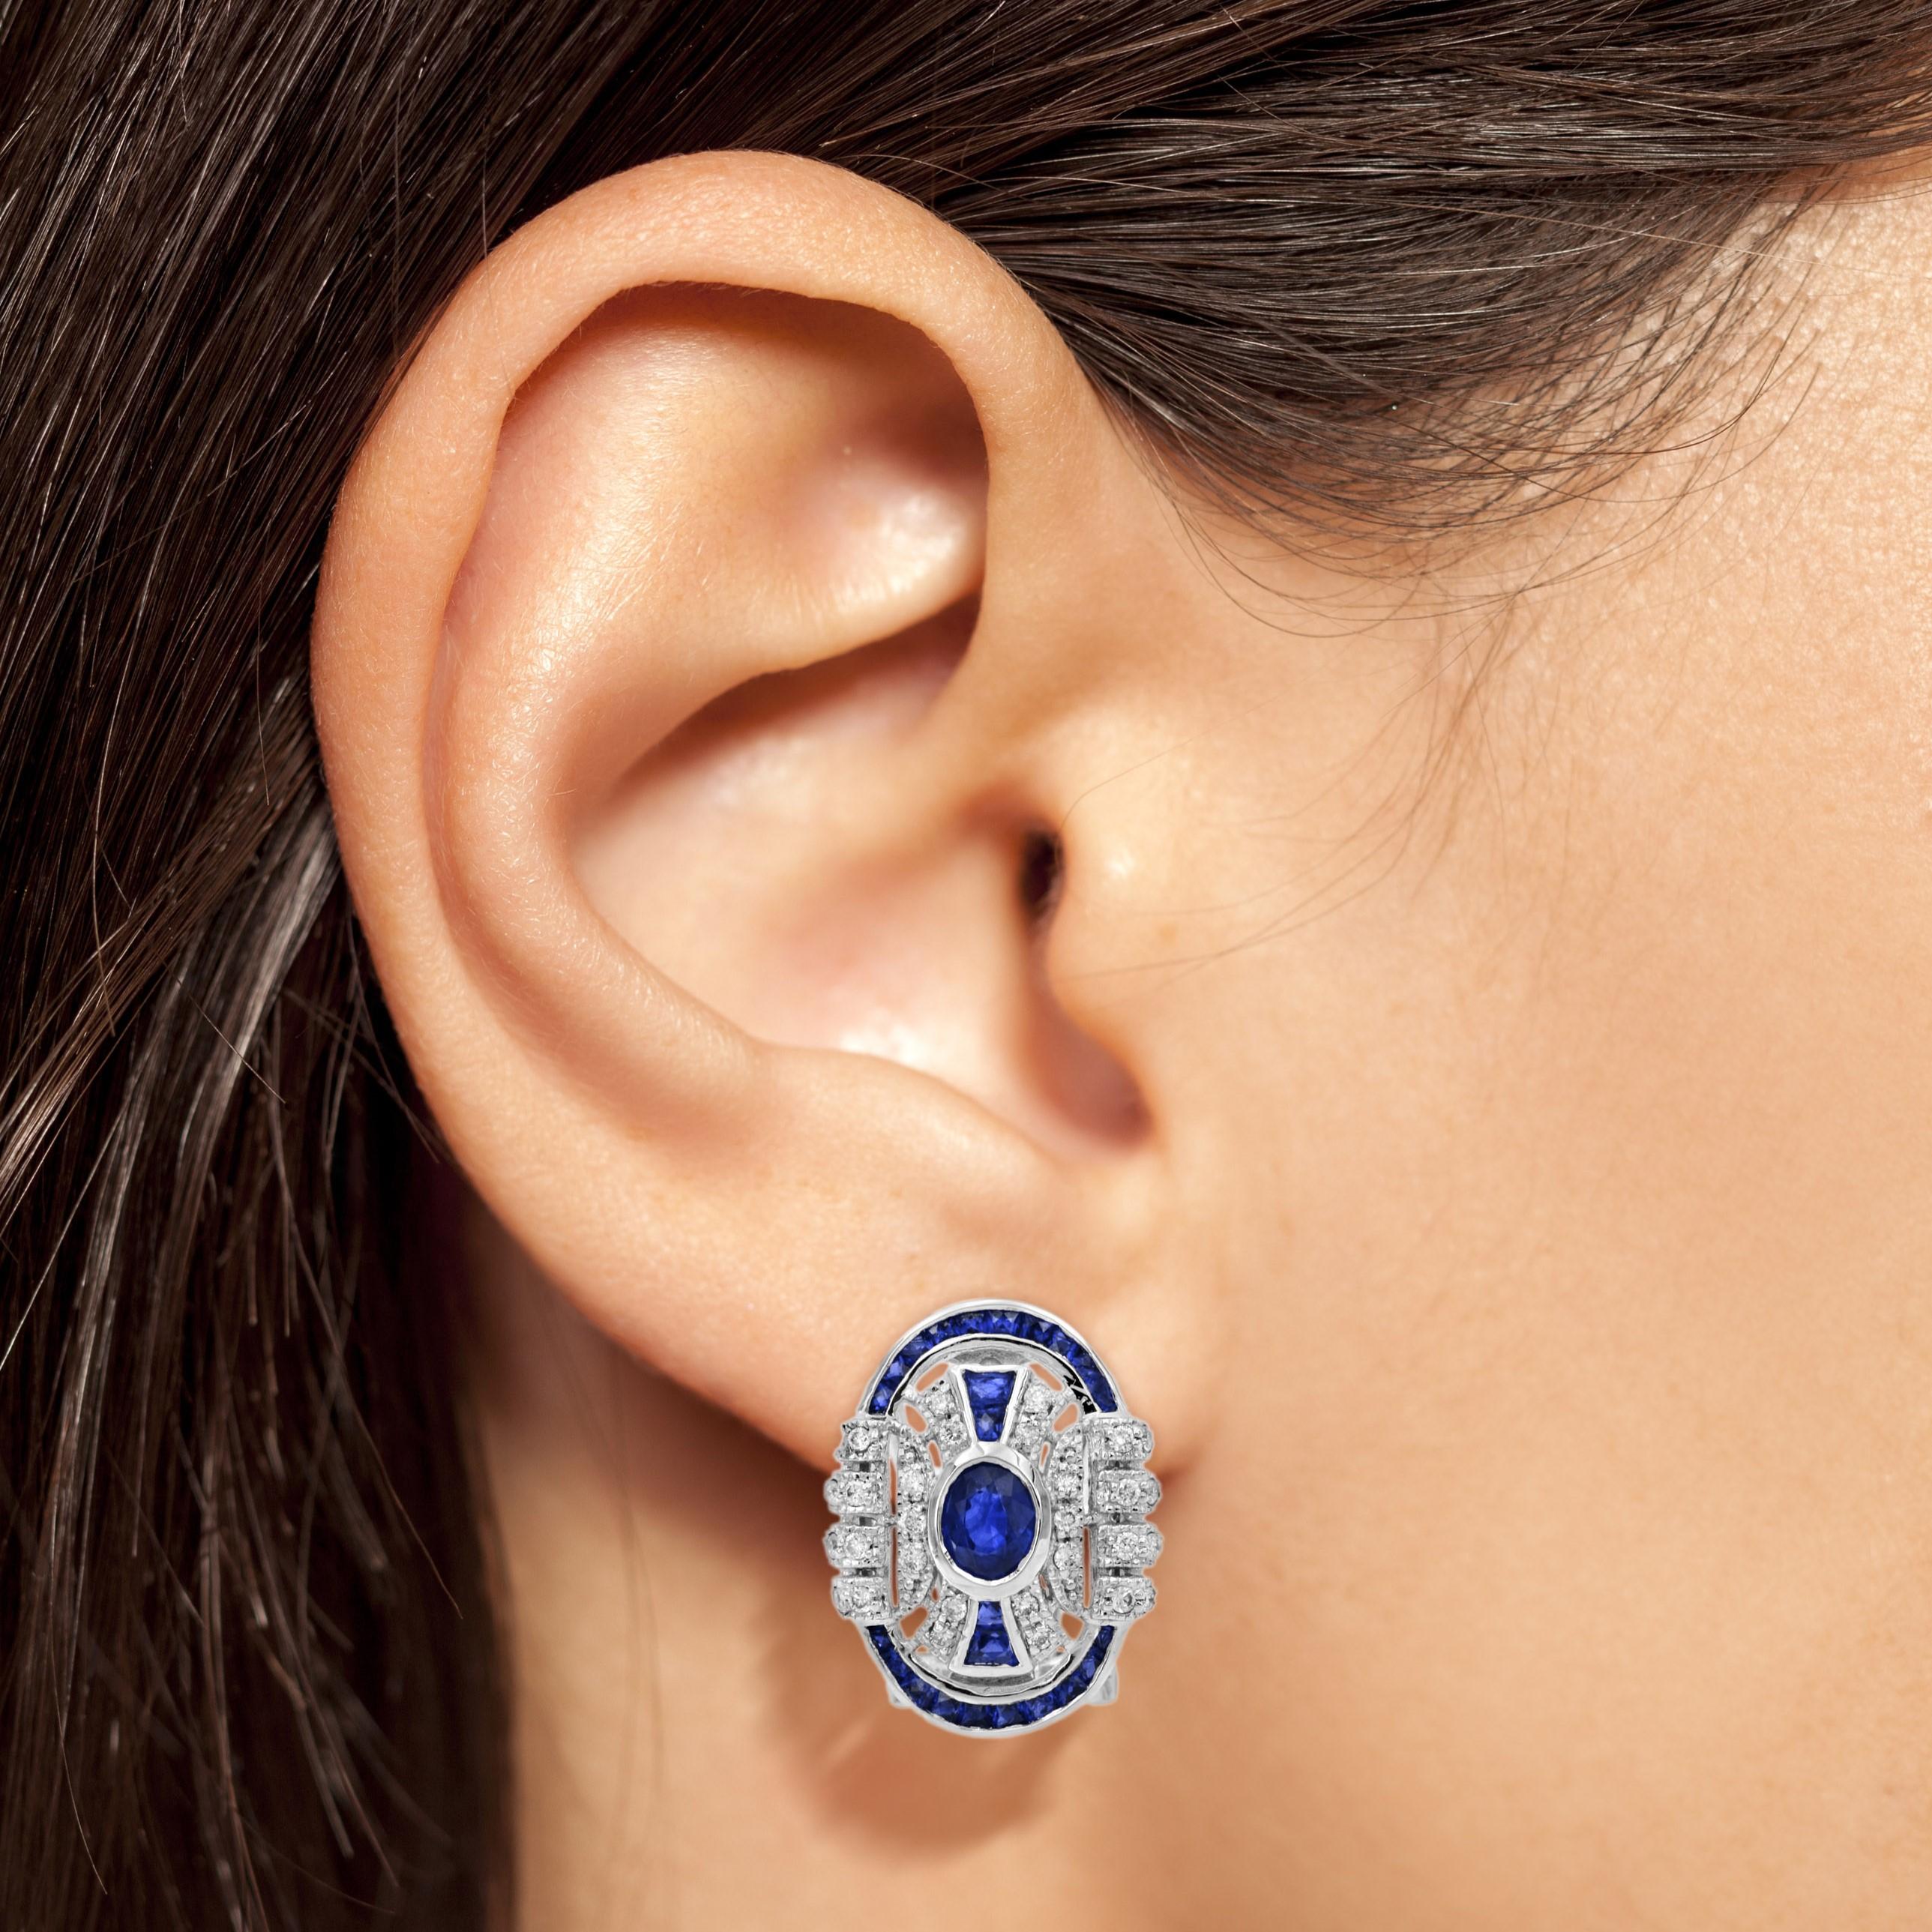 An Art Deco inspired pair of earrings that draws all the attention to the oval shaped blue sapphires placed in the middle. Adorned with approx. 0.41 carats diamonds (total) and French cut blue sapphire borders, this gorgeous earrings sparkle with